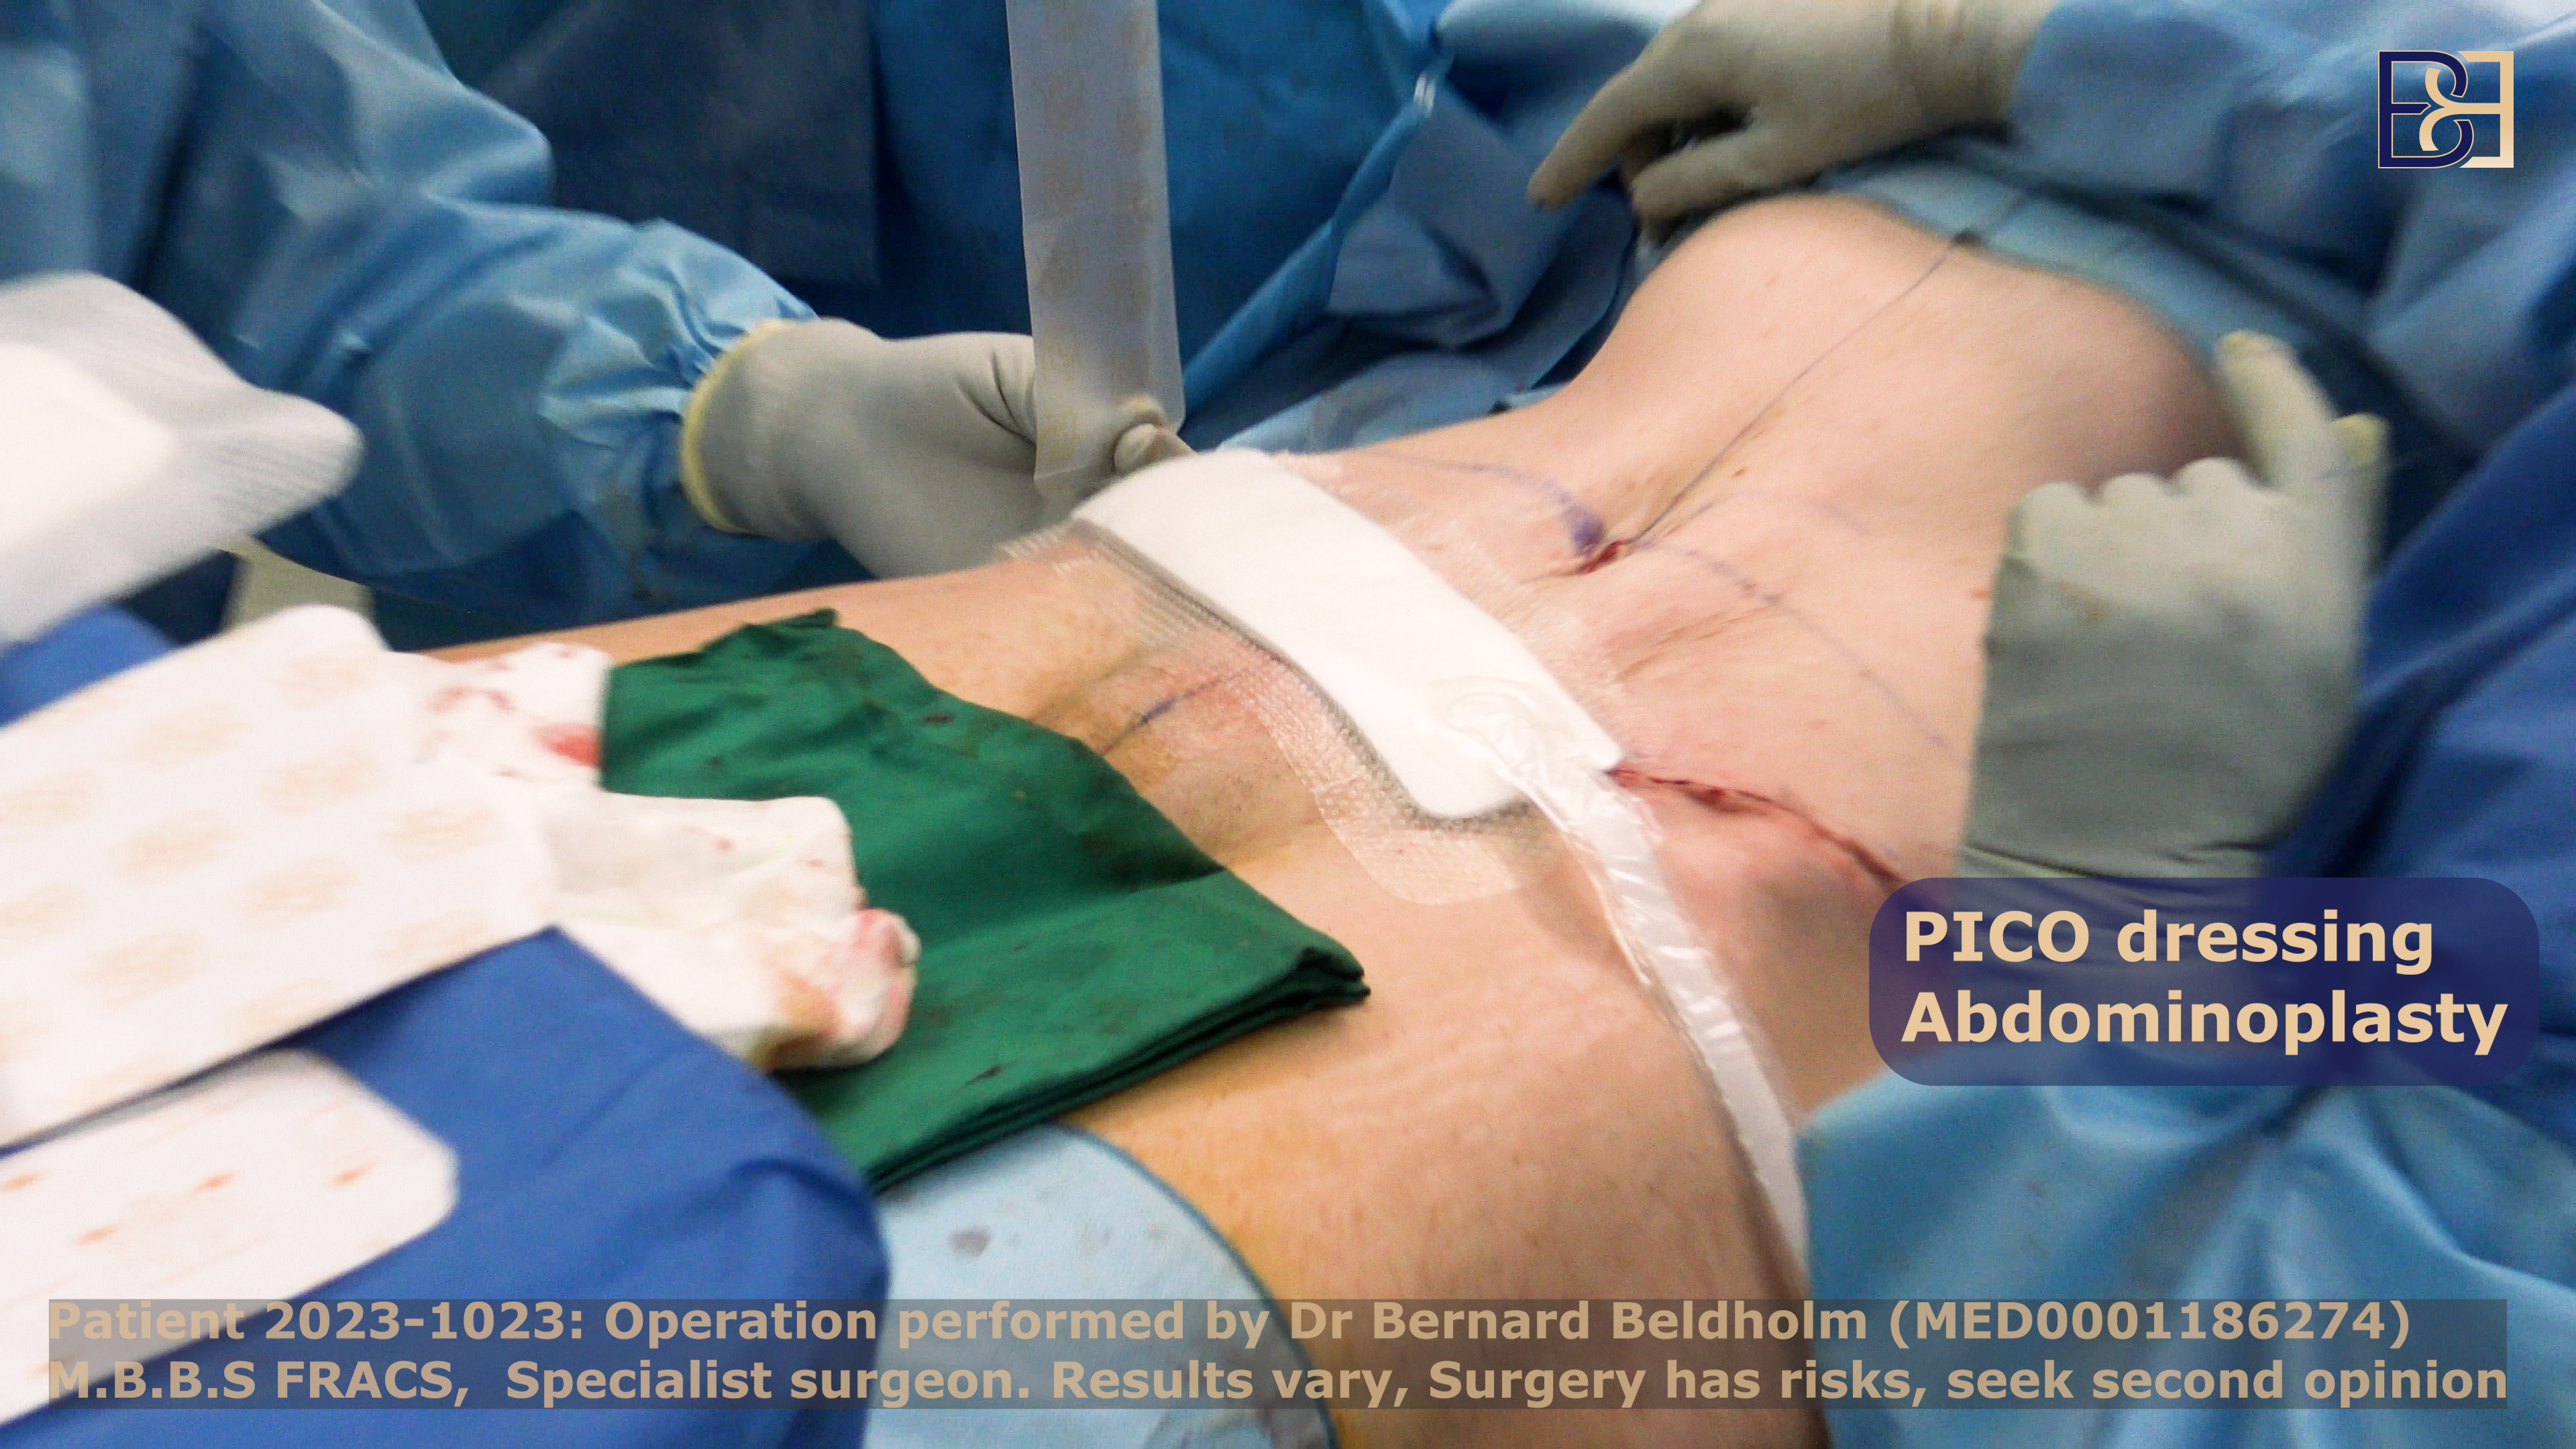 PICO Negative Pressure Wound Therapy used by Dr Beldholm during Fleur-de-lis abdominoplasty (tummy tuck)m